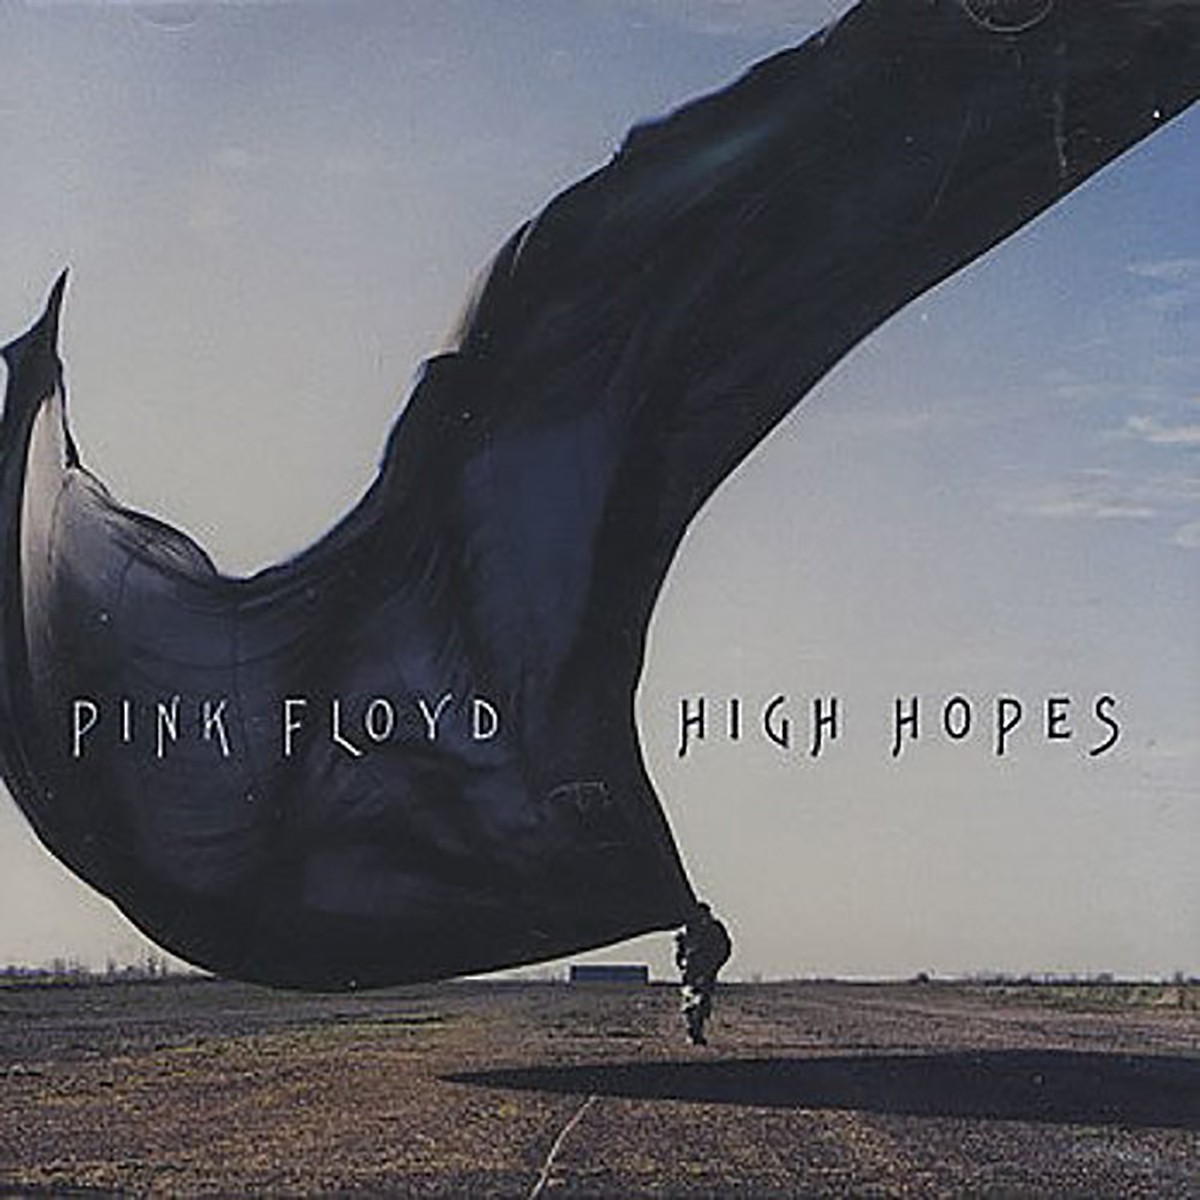 Cover of the single "The High Hopes".